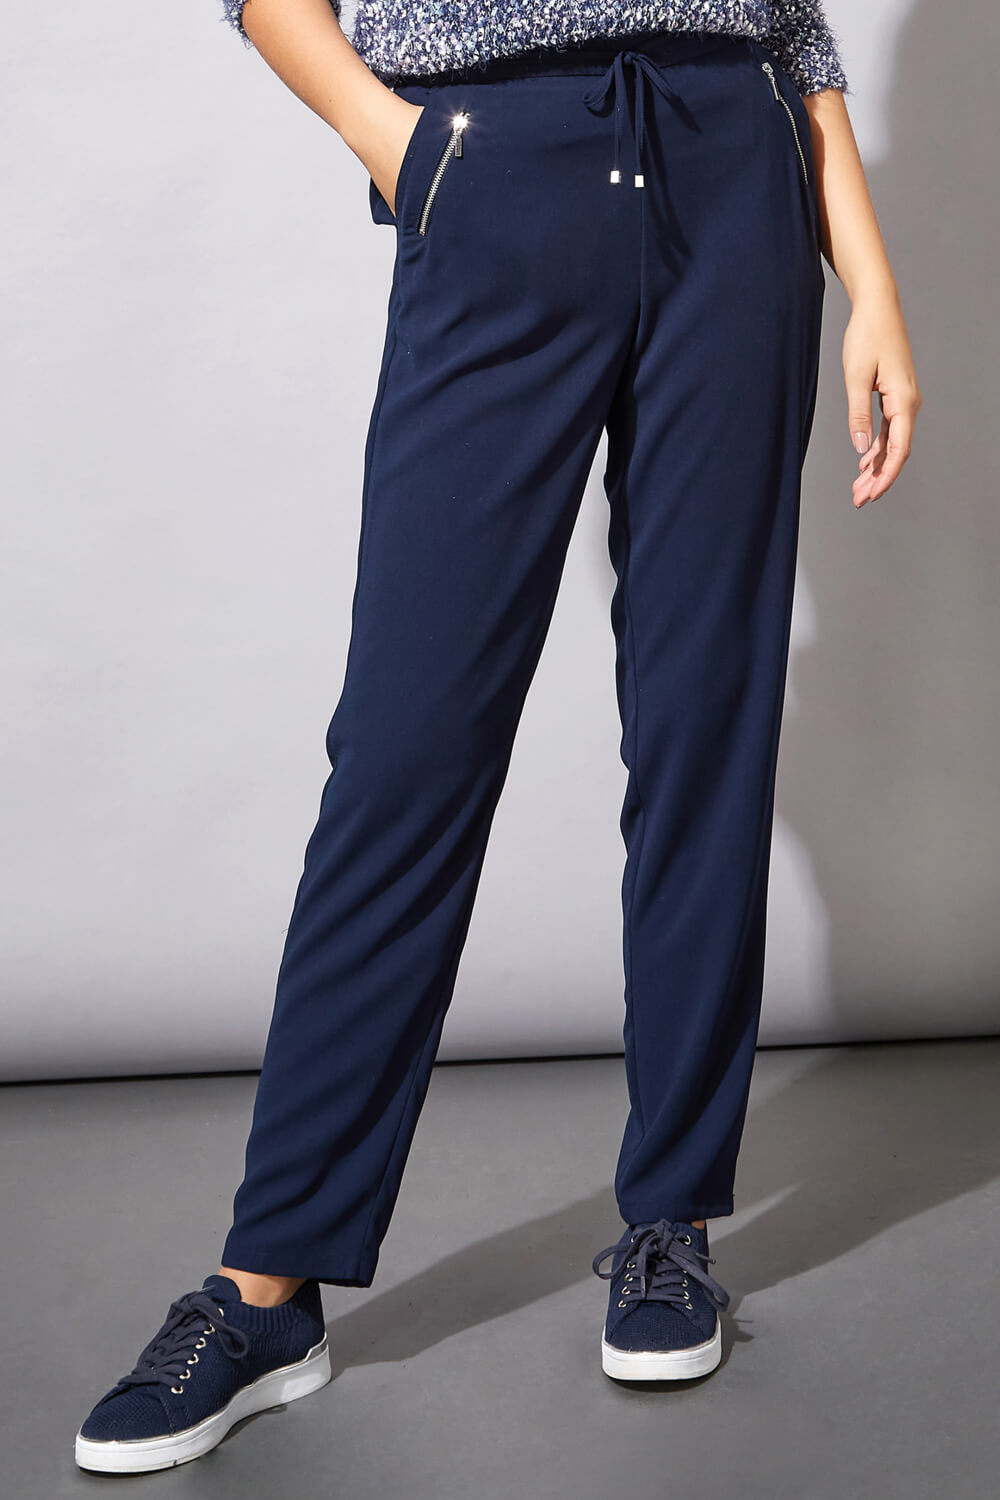 29 Inch Tie Front Jogger